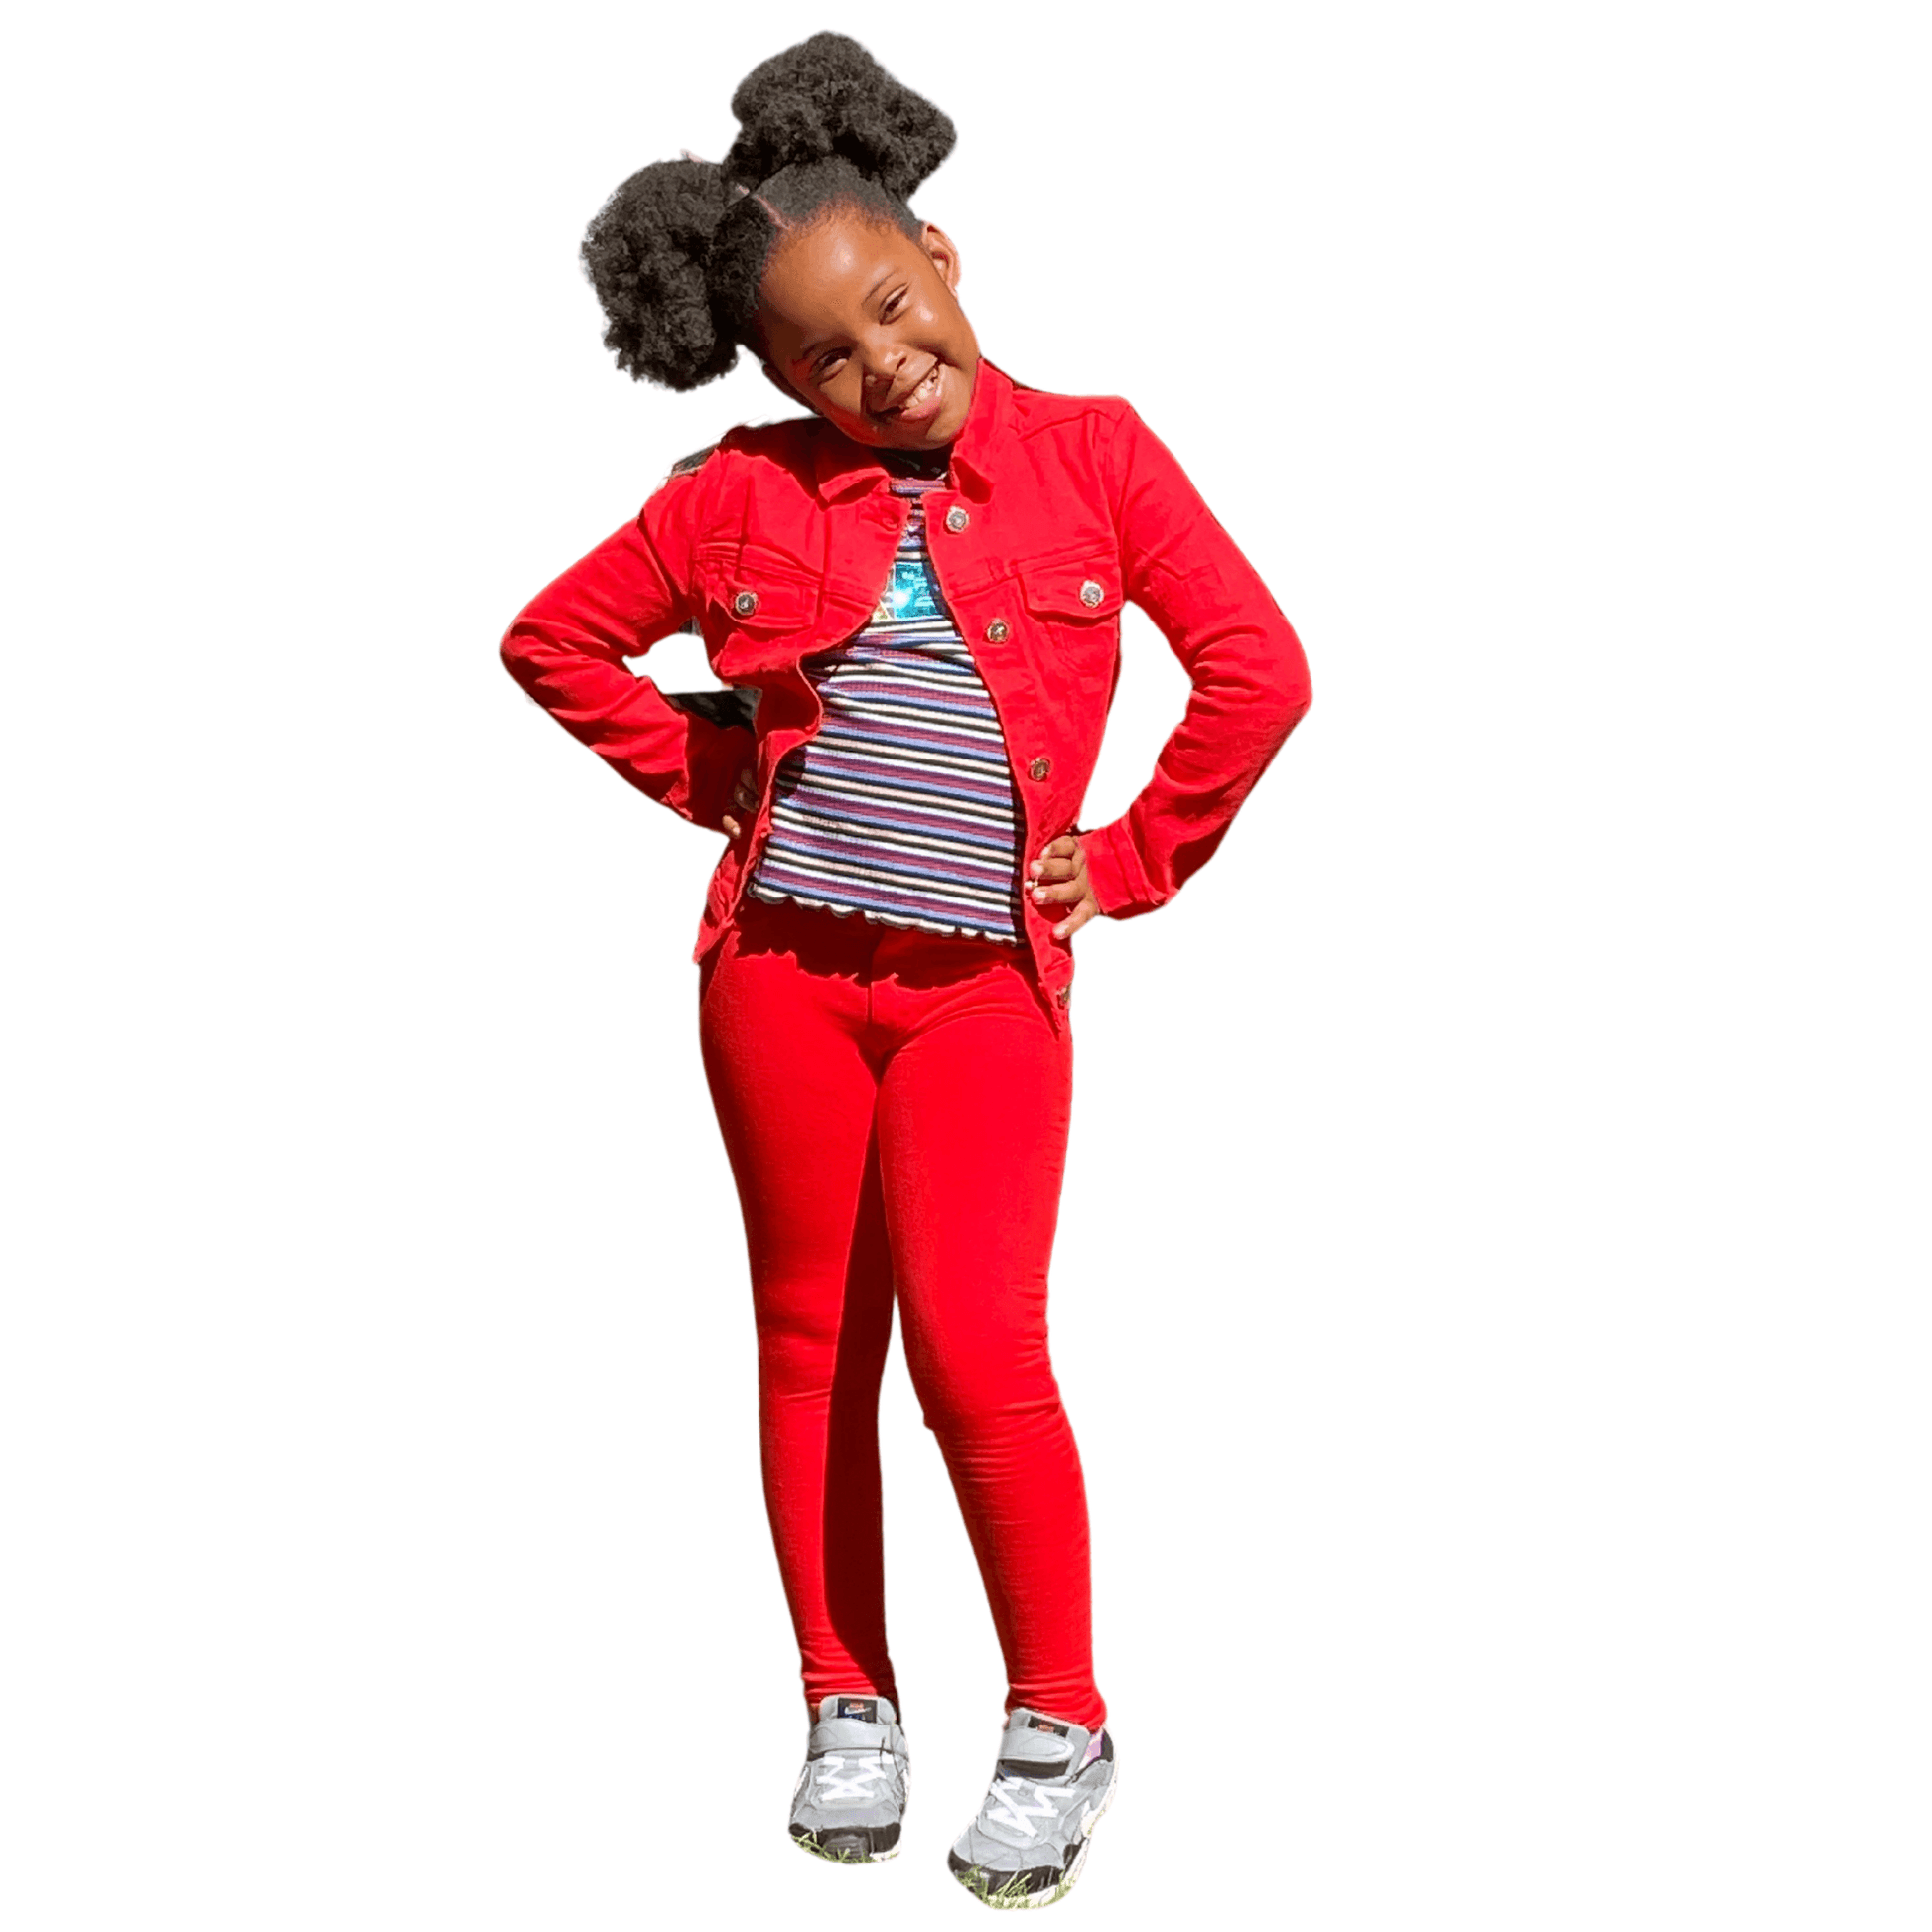 Our ruffle sleeved "DREAM" shirt is a perfect addition to the wardrobe of the little lady in your life.  This shirt features long sleeves and a mock turtle neck with scalloped edges.  This shirt has red, navy, and blue stripes with the word "DREAM" in sequins.   Model is wearing a size 10/12. 